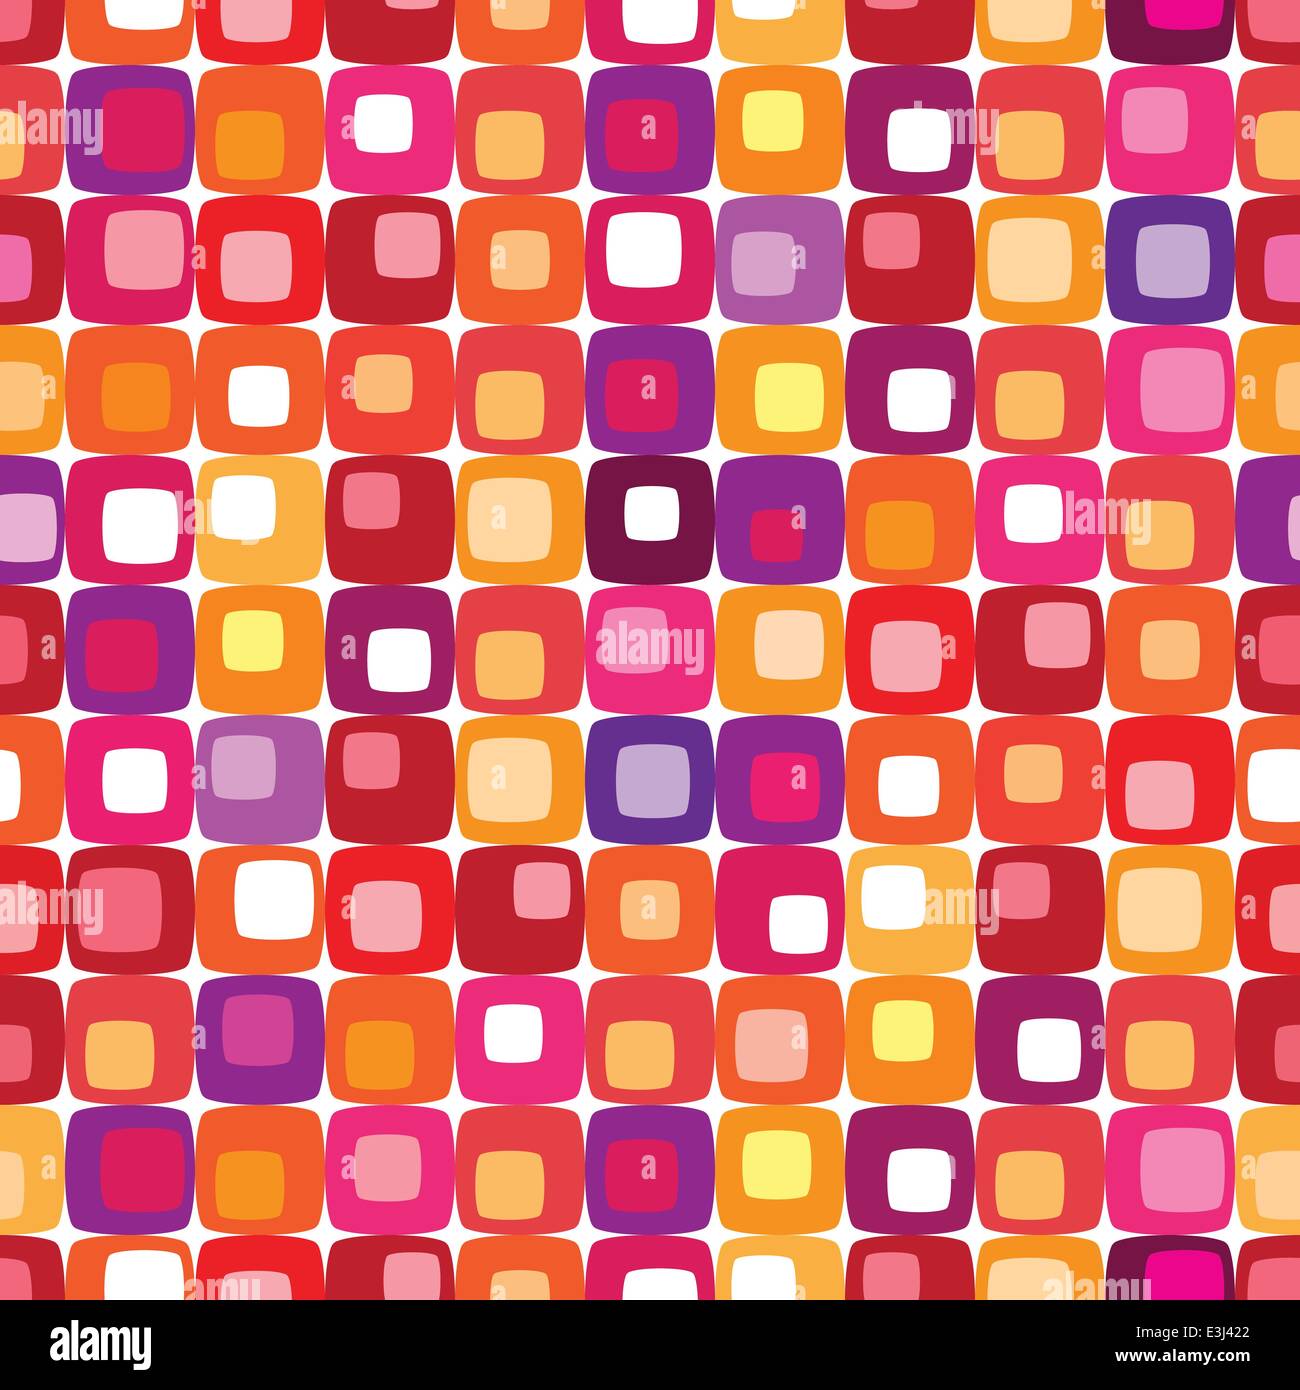 Retro colorful square pattern, tiles in any direction. Stock Vector